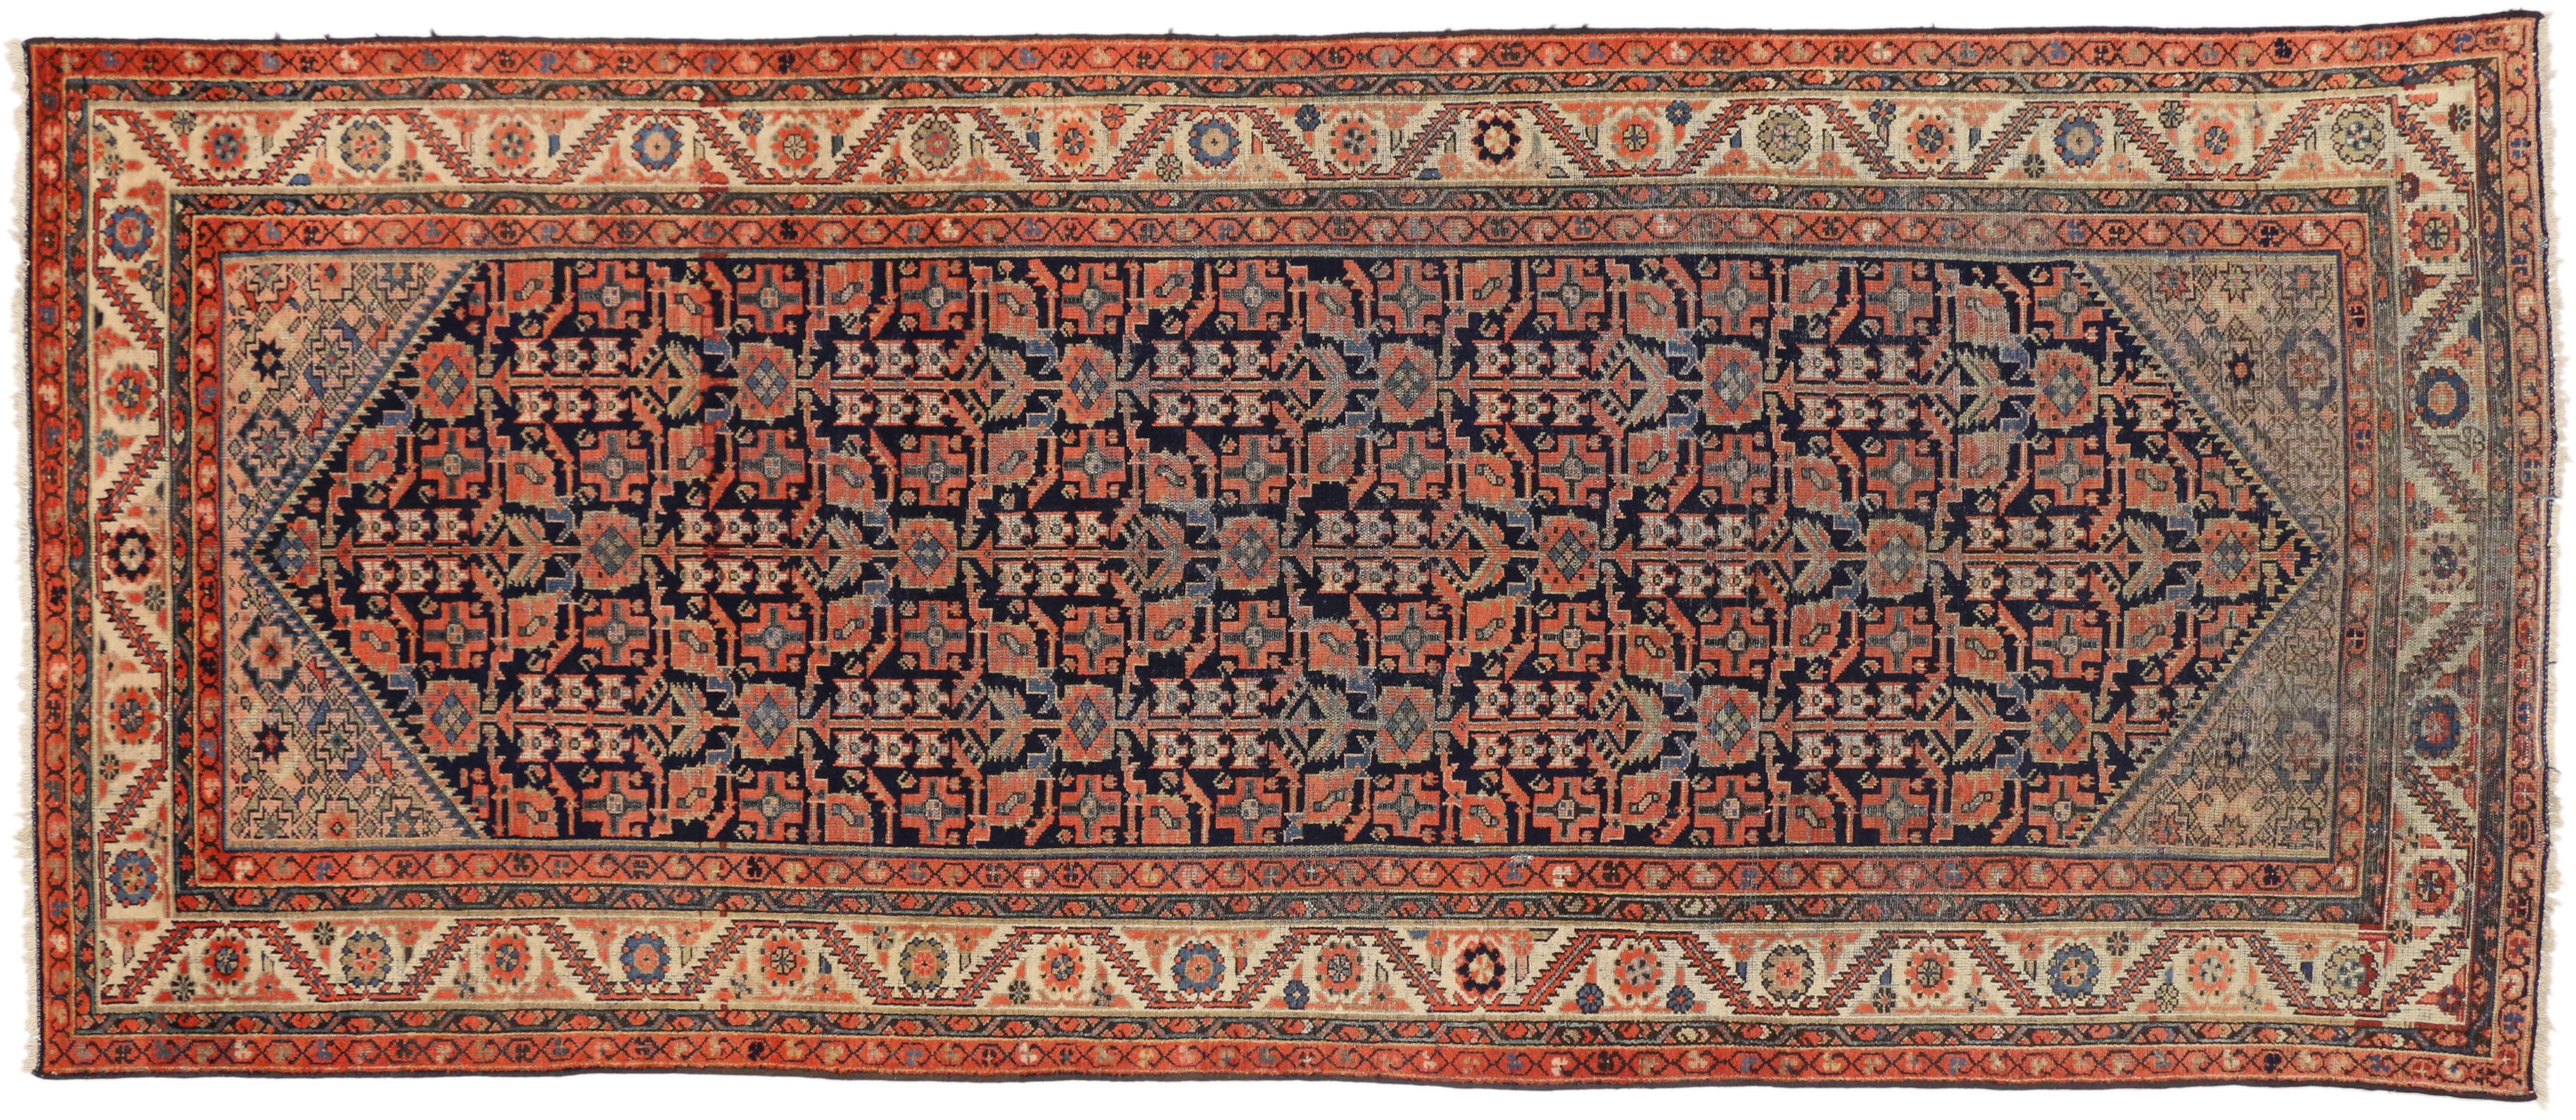 Vintage Persian Malayer Gallery Rug with Guli Hinnai Flower, Wide Hallway Runner In Good Condition For Sale In Dallas, TX